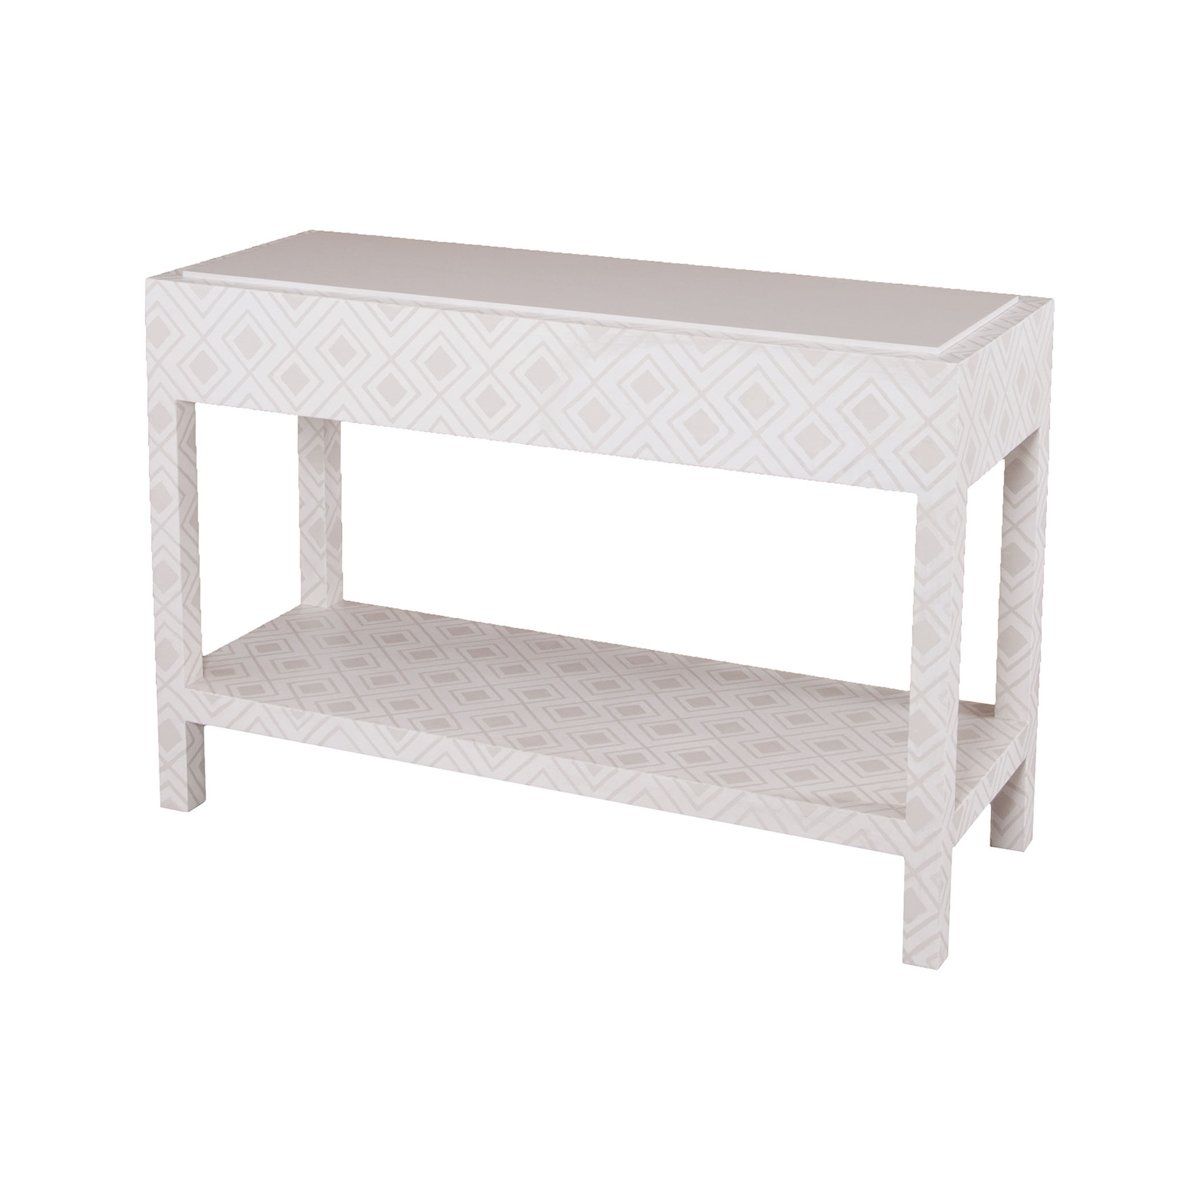 Kent Fabric Wrapped Console | Products In 2018 | Pinterest Throughout Parsons White Marble Top &amp; Elm Base 48x16 Console Tables (View 21 of 30)